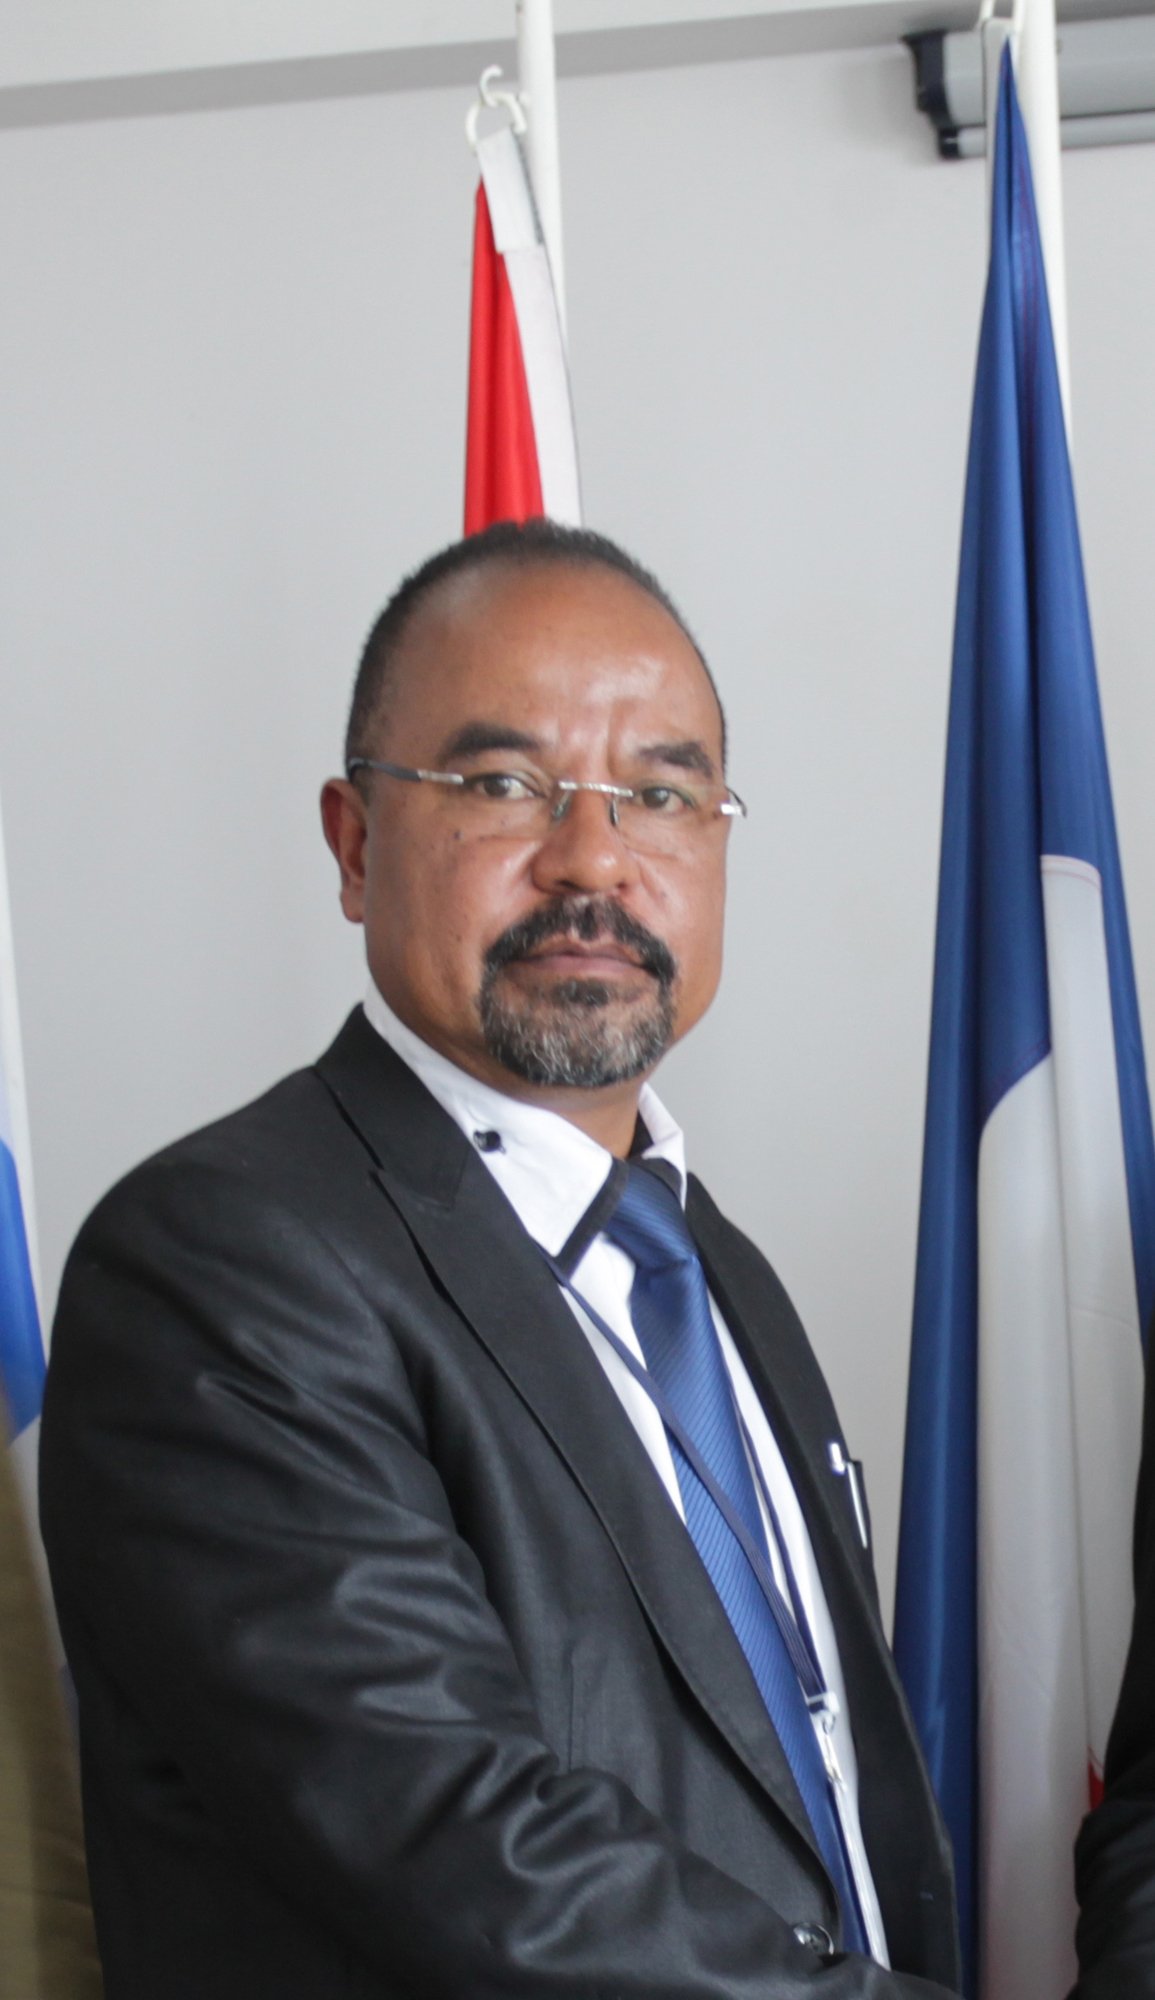 Ndranto Razakamanarina, President of the Alliance Voahary Gasy, on the left, and Andris PiebalgsVisit of Andris Piebalgs, Member of the EC, to MadagascarAndris Piebalgs, Member of the EC in charge of Development, travelled to Antananarivo to confirm the resumption of development cooperation with the country and launch the discussions on the programming of EU funding for the period 2014-2020. The visit contributed to mark the return to normality in the EU-Madagascar relations, following the end of the political crisis in the country.Andris Piebalgs launched the works to repair a national road in Morondava (the RN8) that was damaged by storms and cyclones. In the same region, he visited a health centre, a regional directorate of the national education system, and a small dam to improve agricultural development, all of which have received EU funding.Andris Piebalgs also visited another EU-funded project to provide food supplements for children between 6 and 24 months that are affected by malnutrition. 36,000 children benefitted from this project through a total of 36 nutrition centres. &copy; EU/EU Delegation to Madagascar/Rajaonisaona Njaka